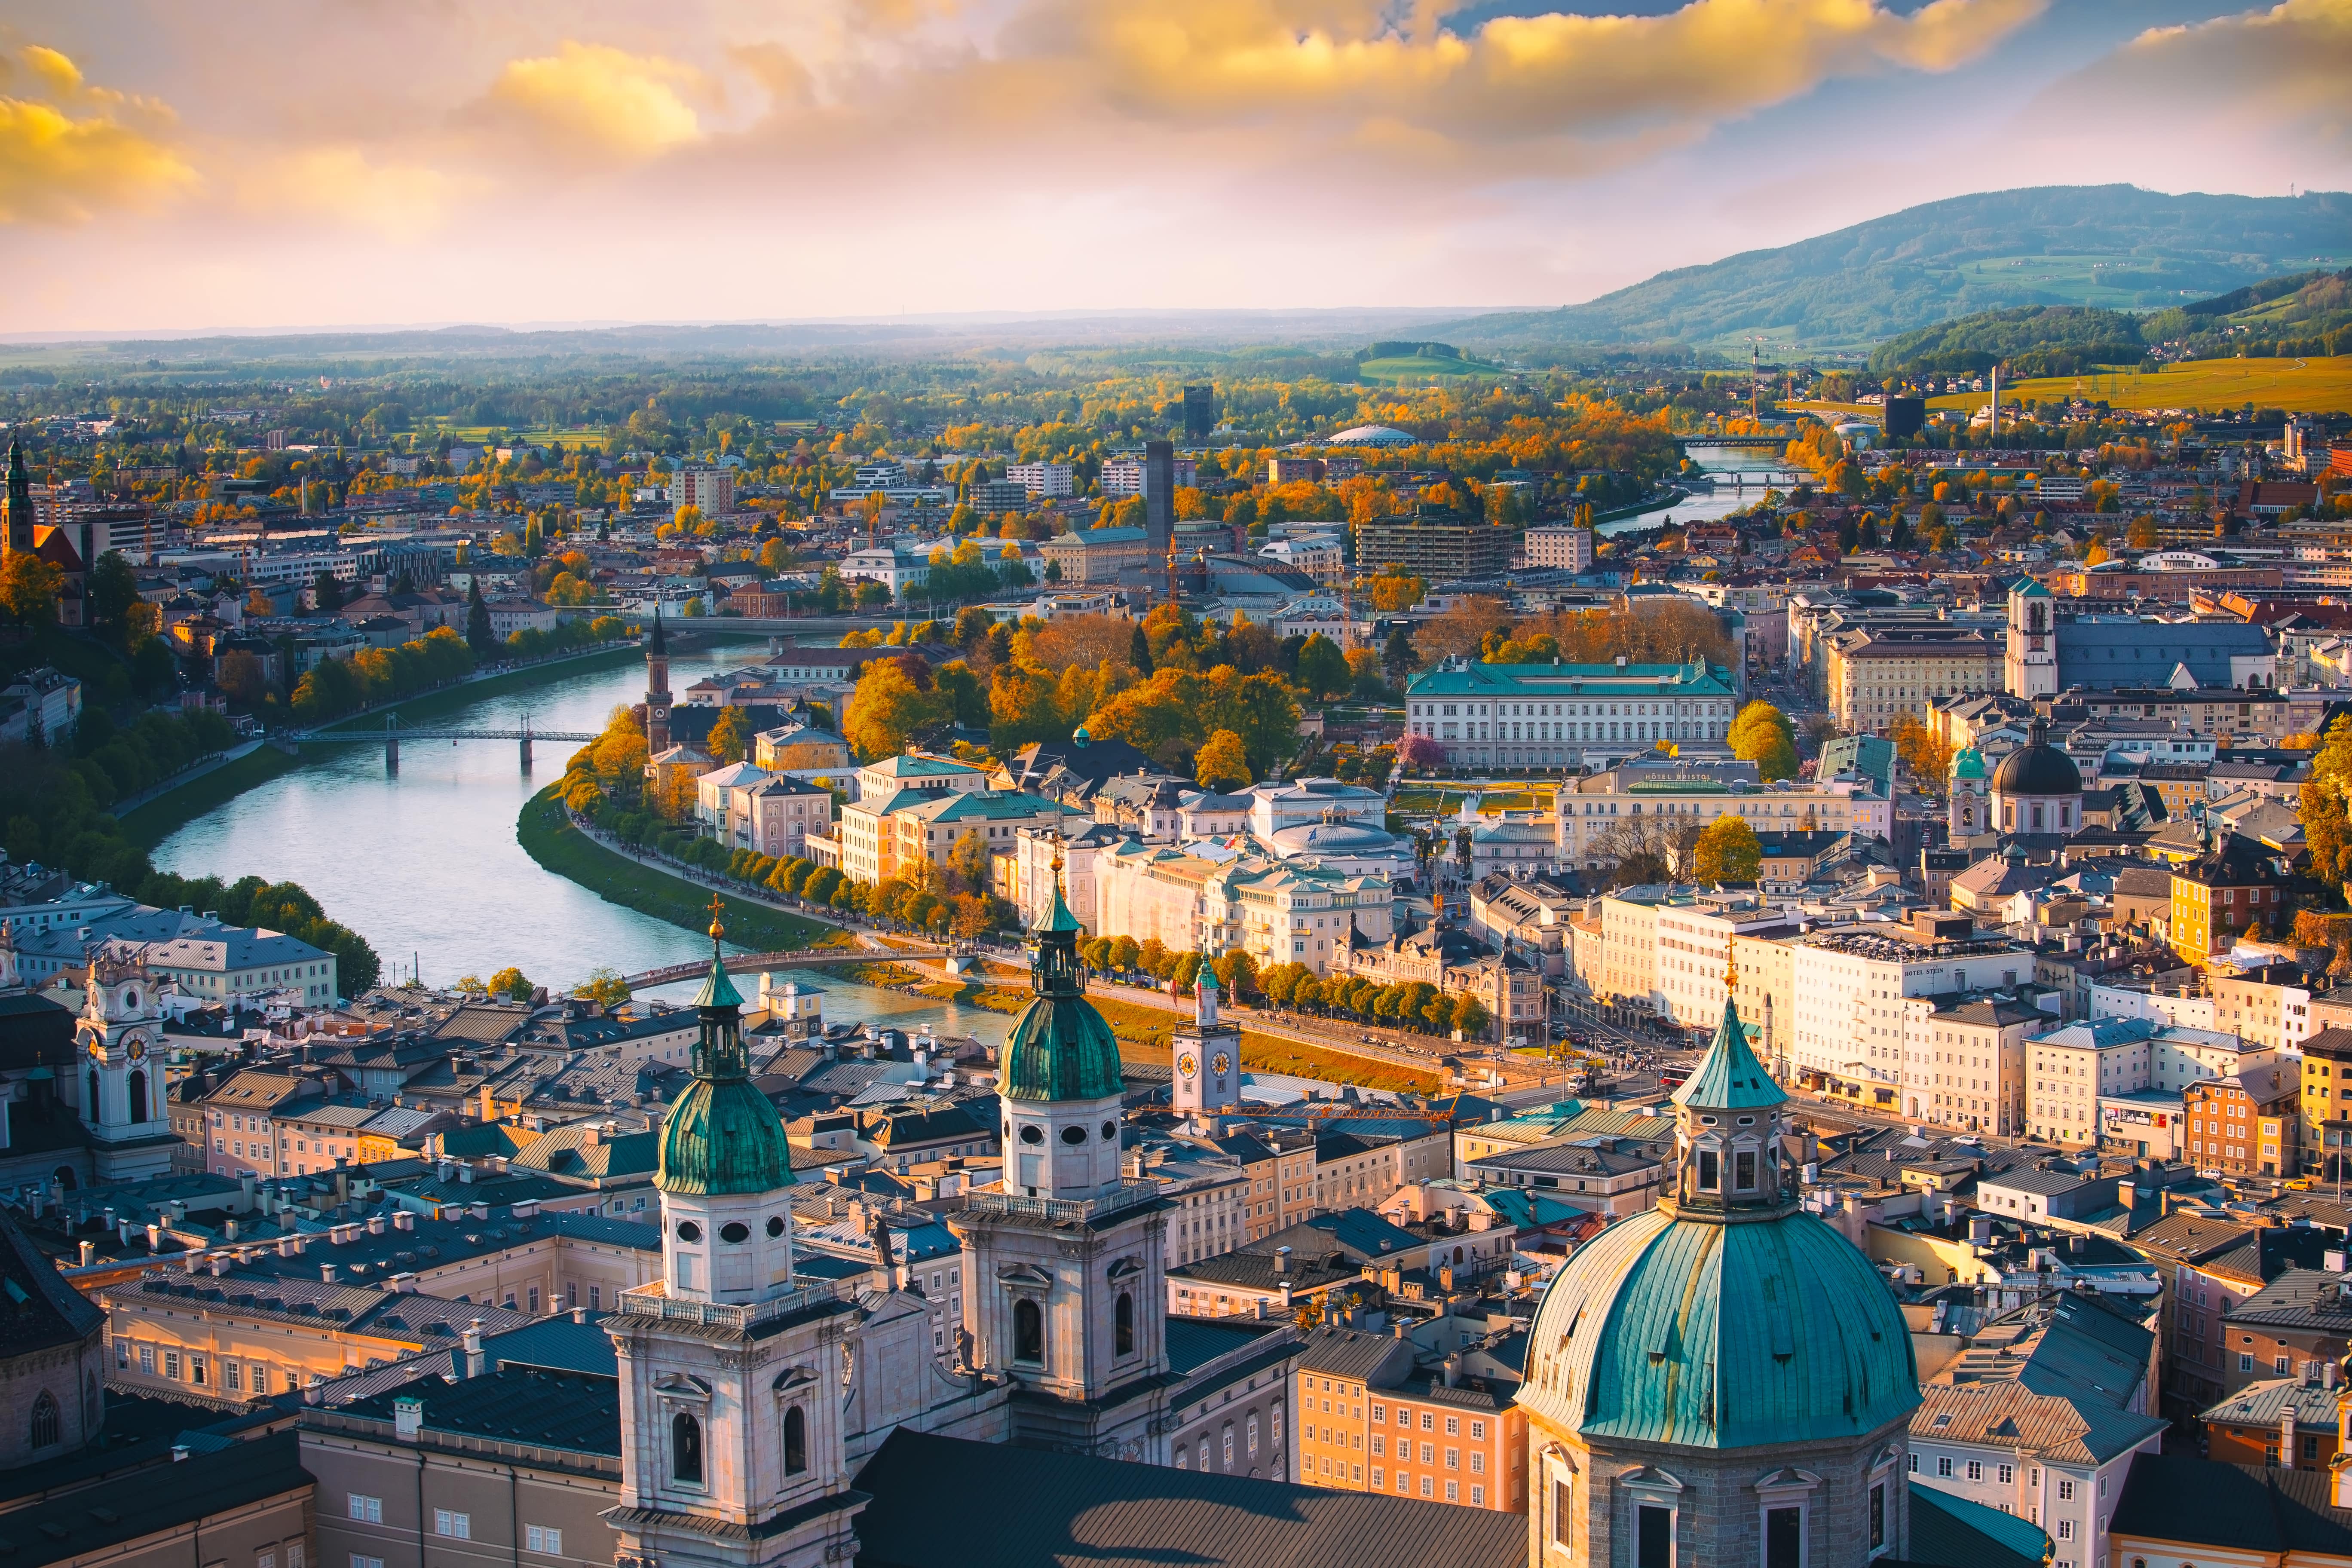 Picture overlooking the city of Vienna with gothic Austrian architecture and the river Danube in the background